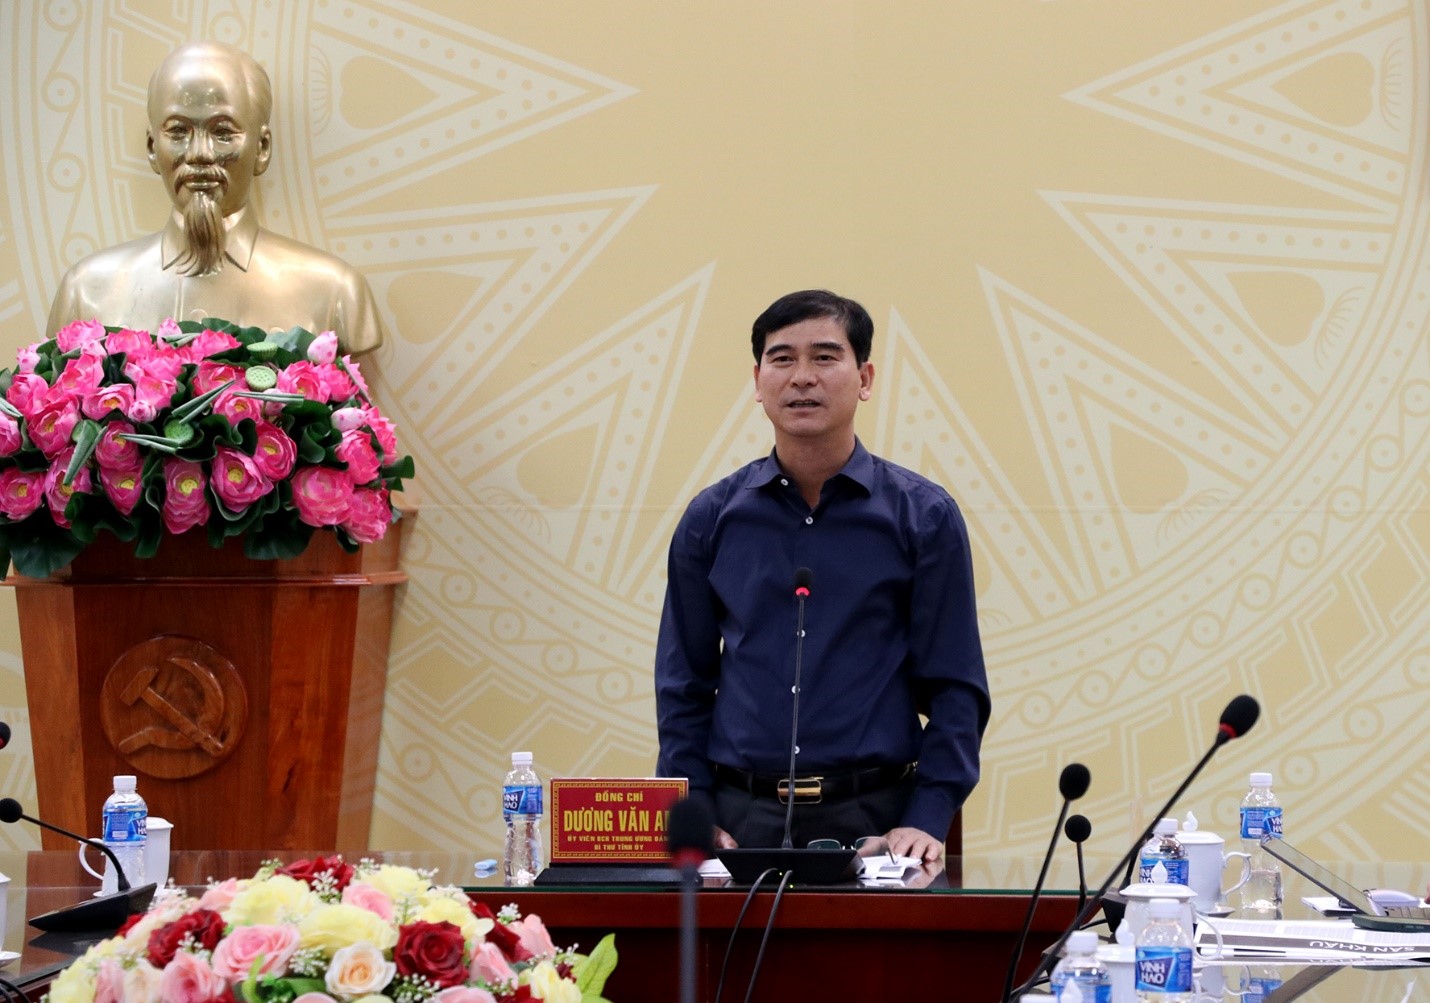 Secretary of Binh Thuan Provincial Party Committee - Duong Van An, delivered a speech.